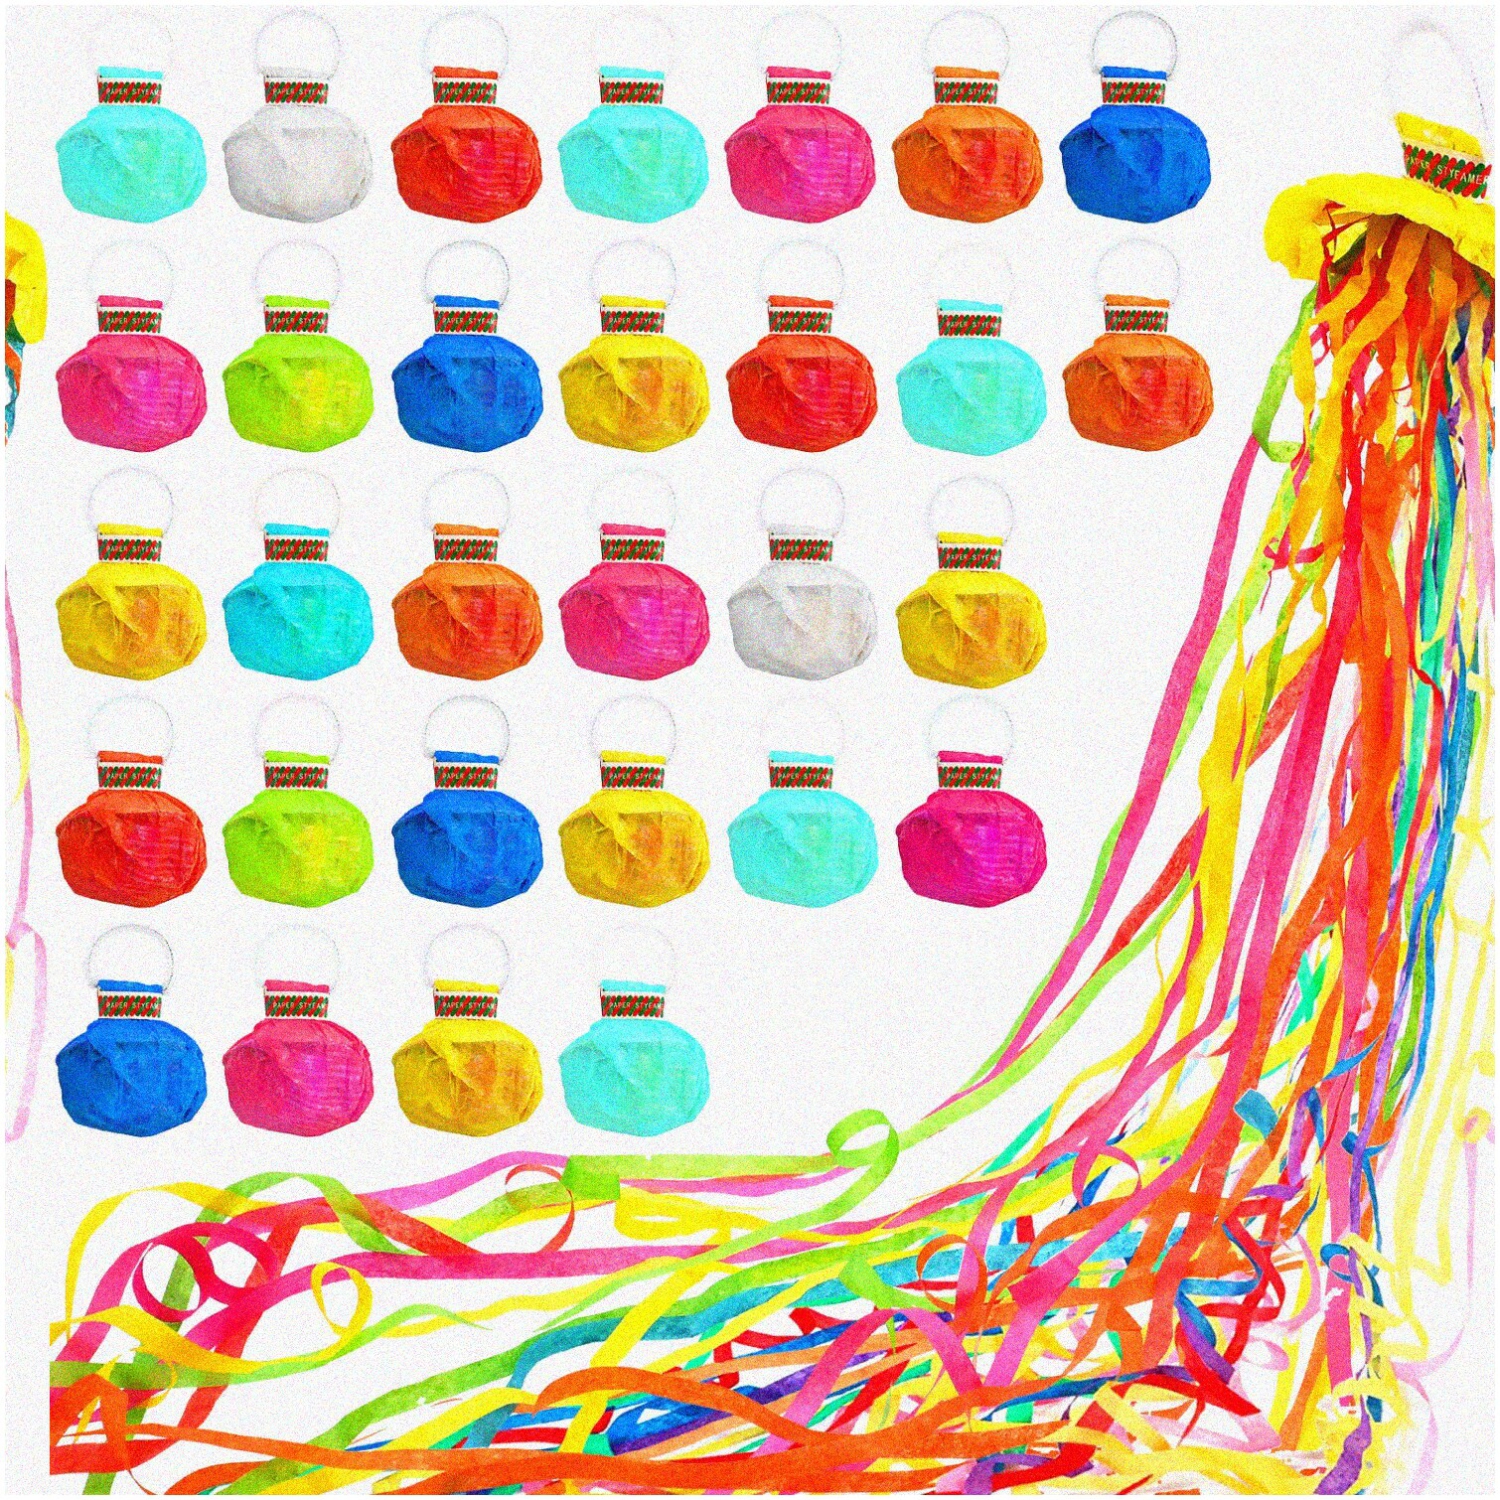 Colorful Celebration Confetti Poppers - 30 Hand Throw Streamers for Birthday, Wedding, Graduation Parties - No Mess Paper Crackers and Party Favors